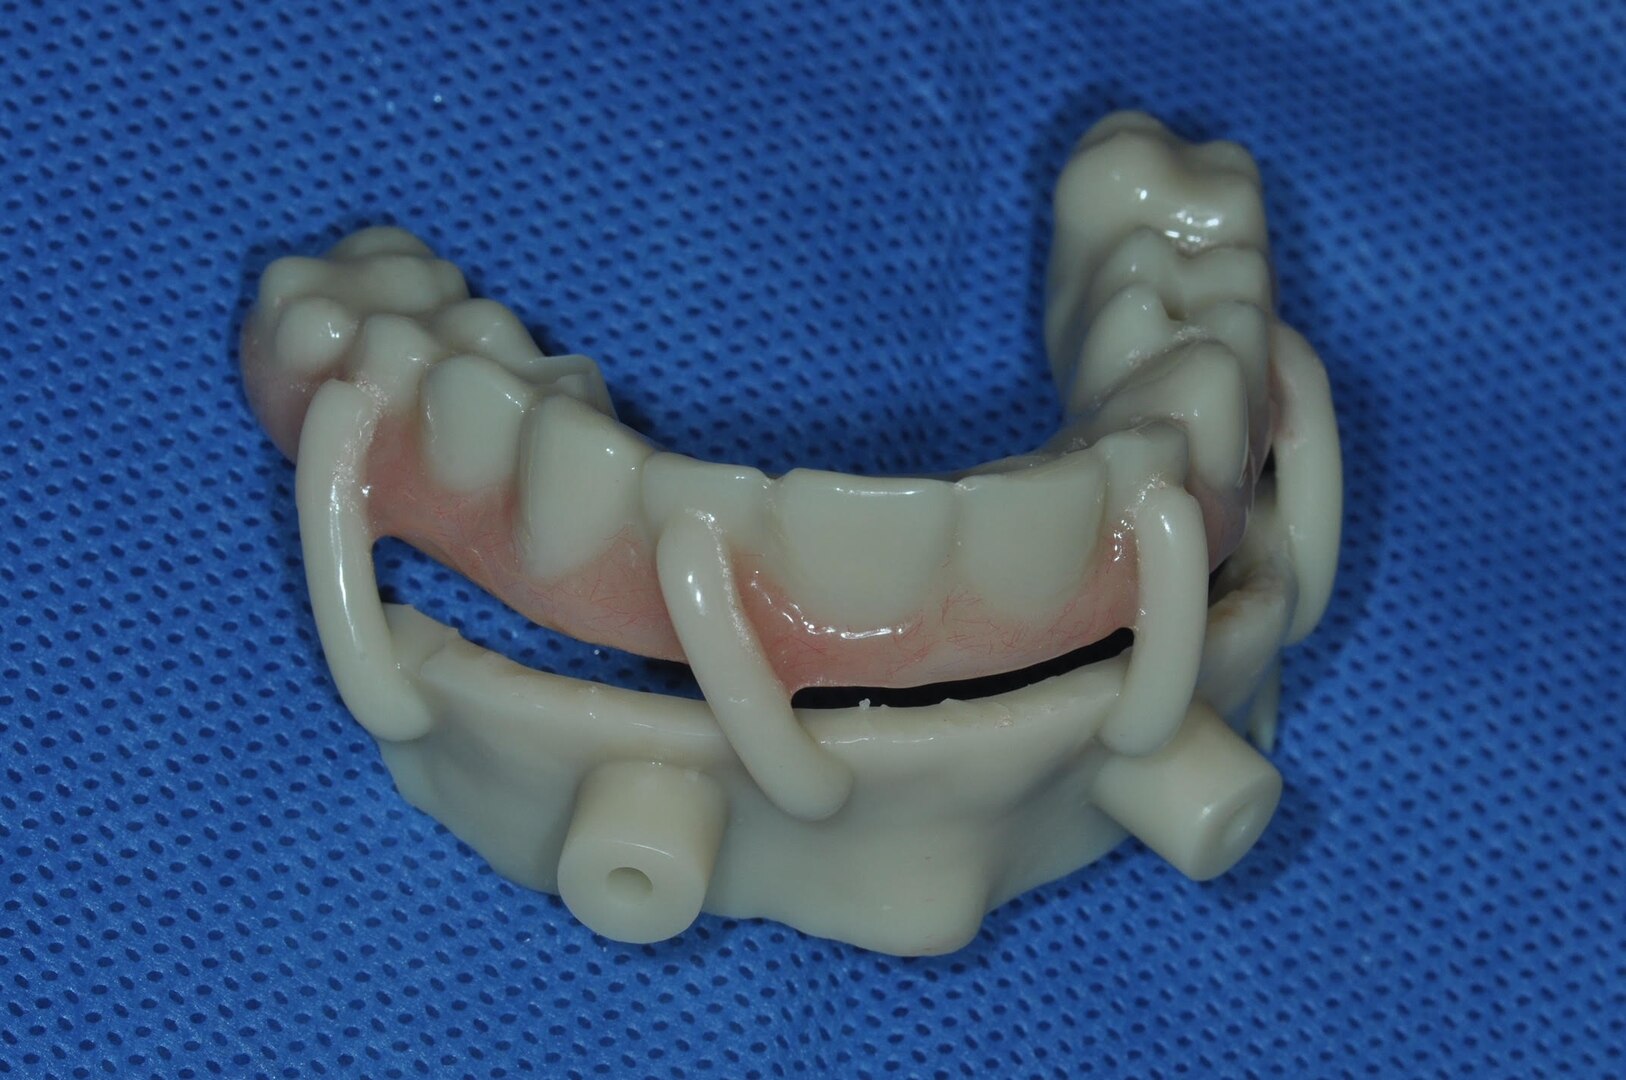 The actual 3D-printed teeth that were implanted by Navy dentists in one of the two patients that underwent the “all-on-4” procedure at Naval Hospital Bremerton, Washington in April, 2022. (Courtesy photo/U.S. Navy)